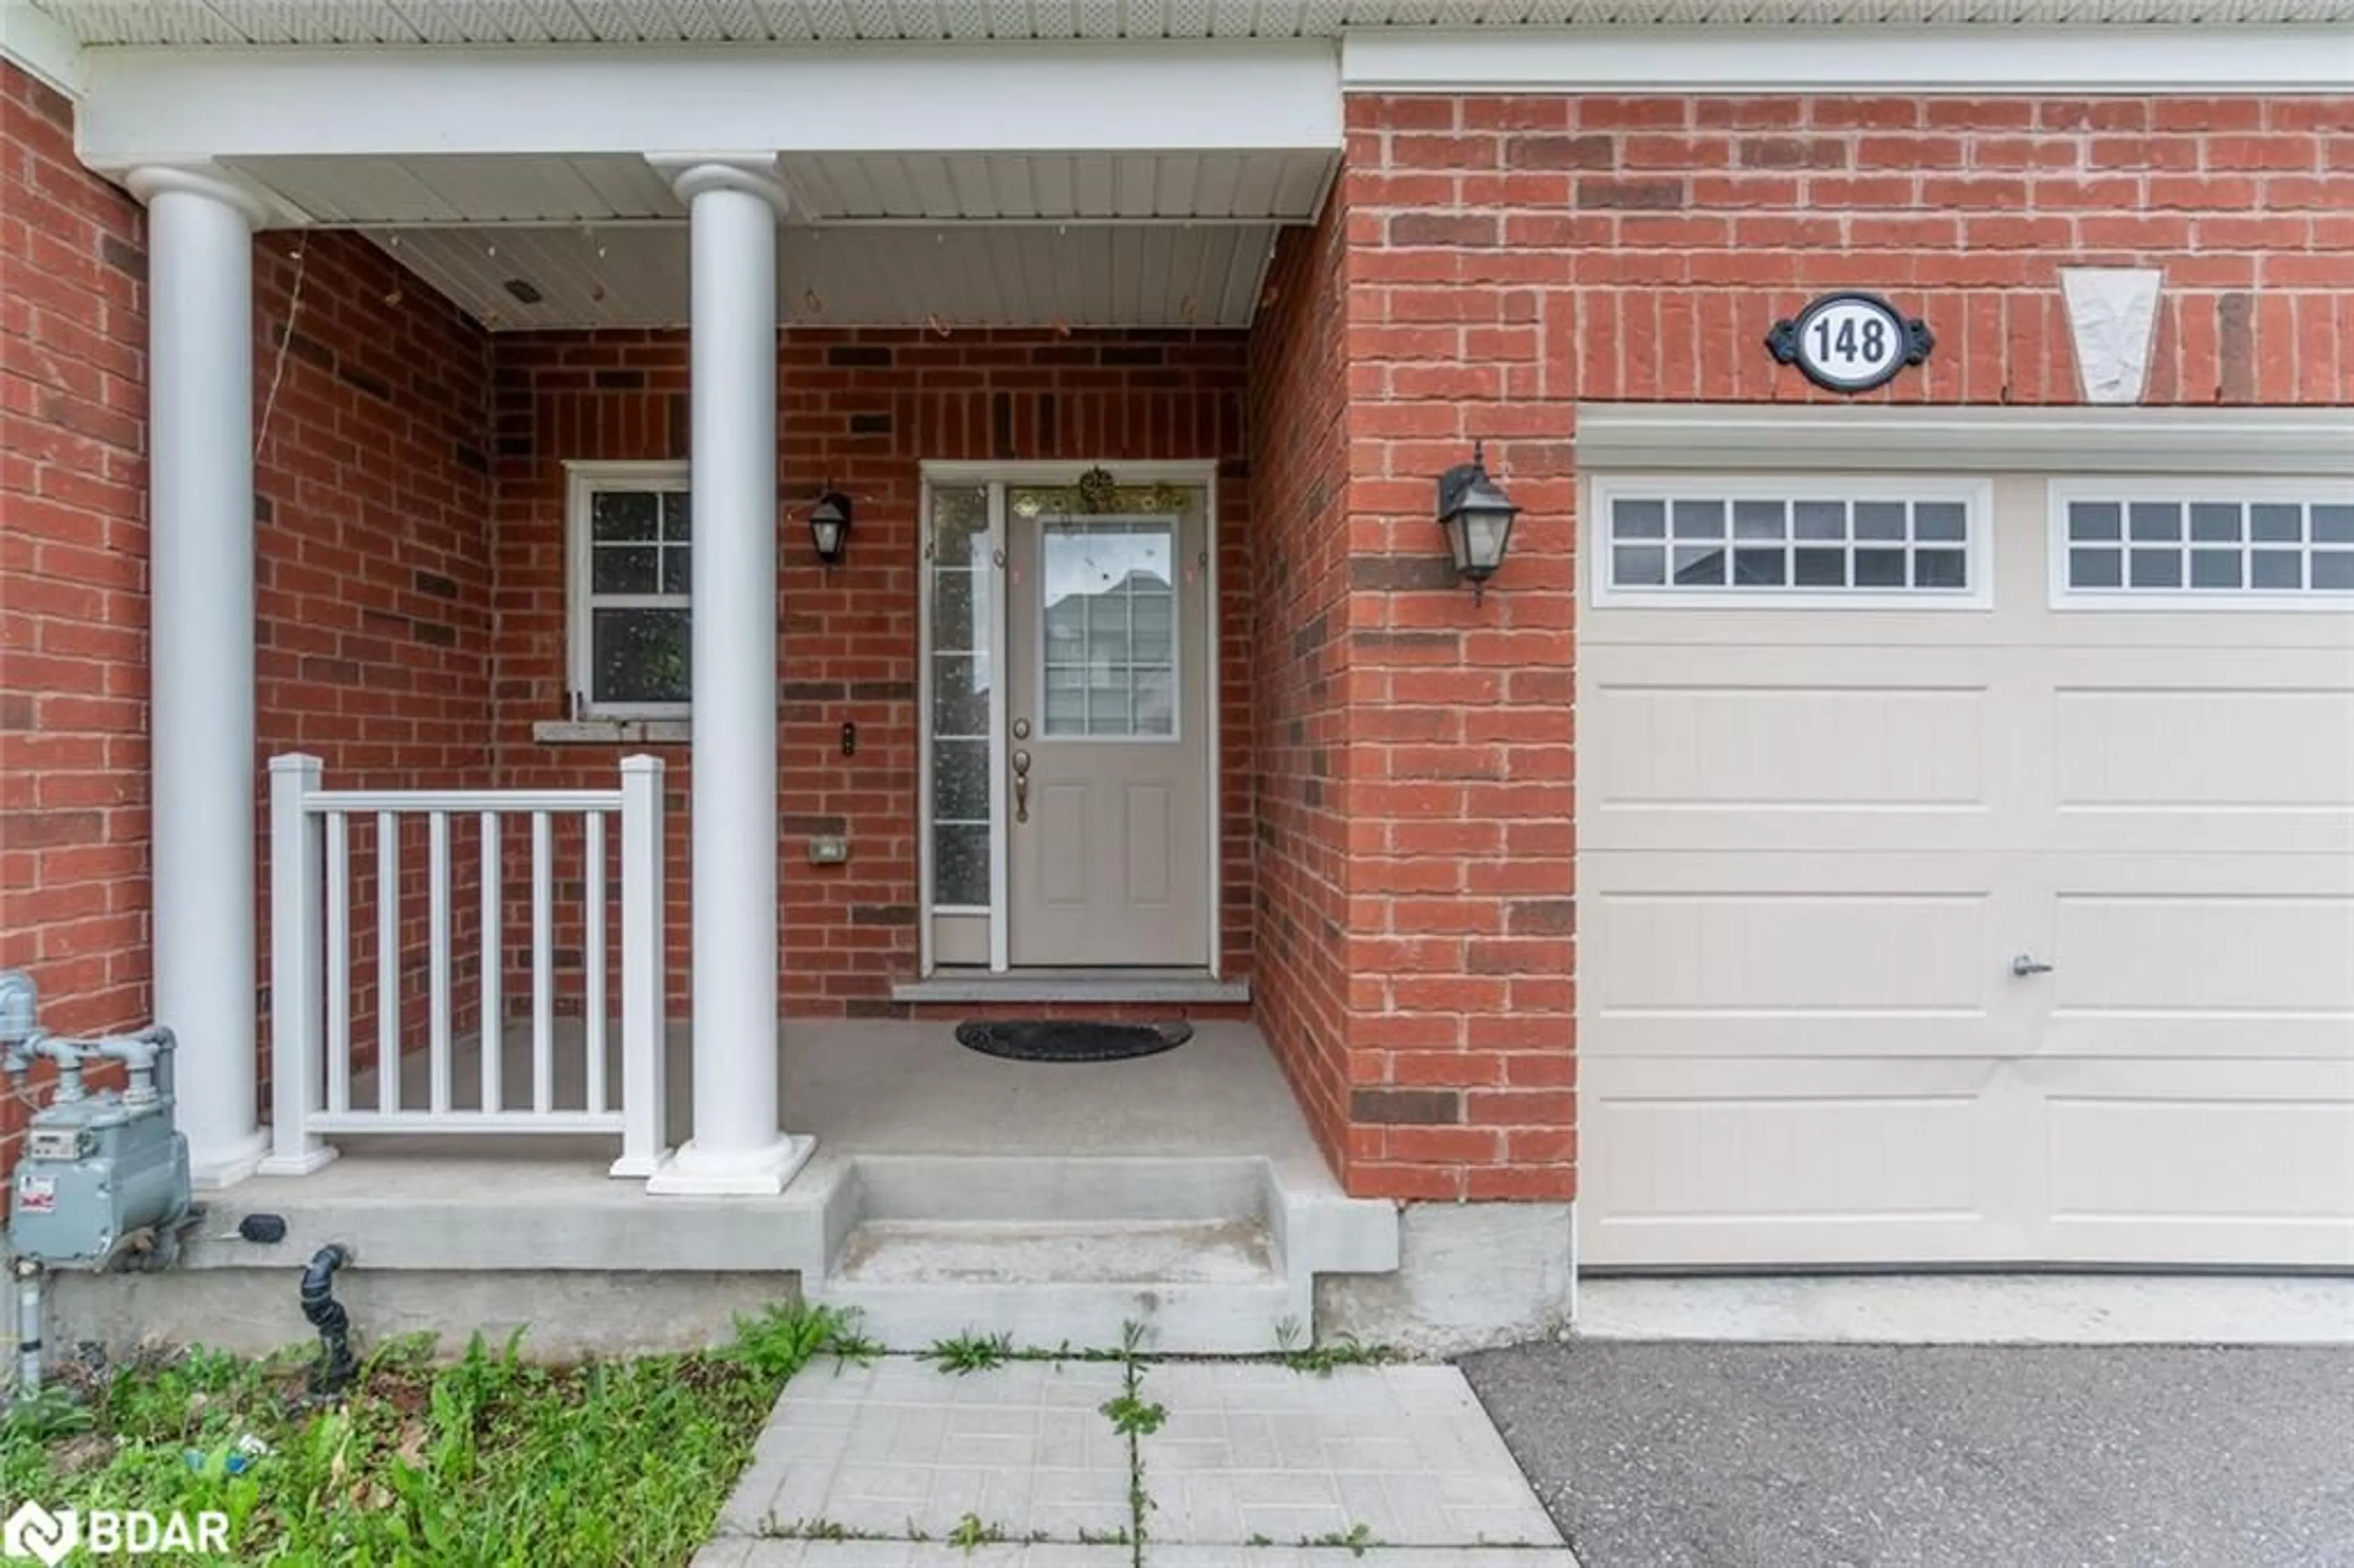 Home with brick exterior material for 148 Watermill St, Kitchener Ontario N2P 0G4